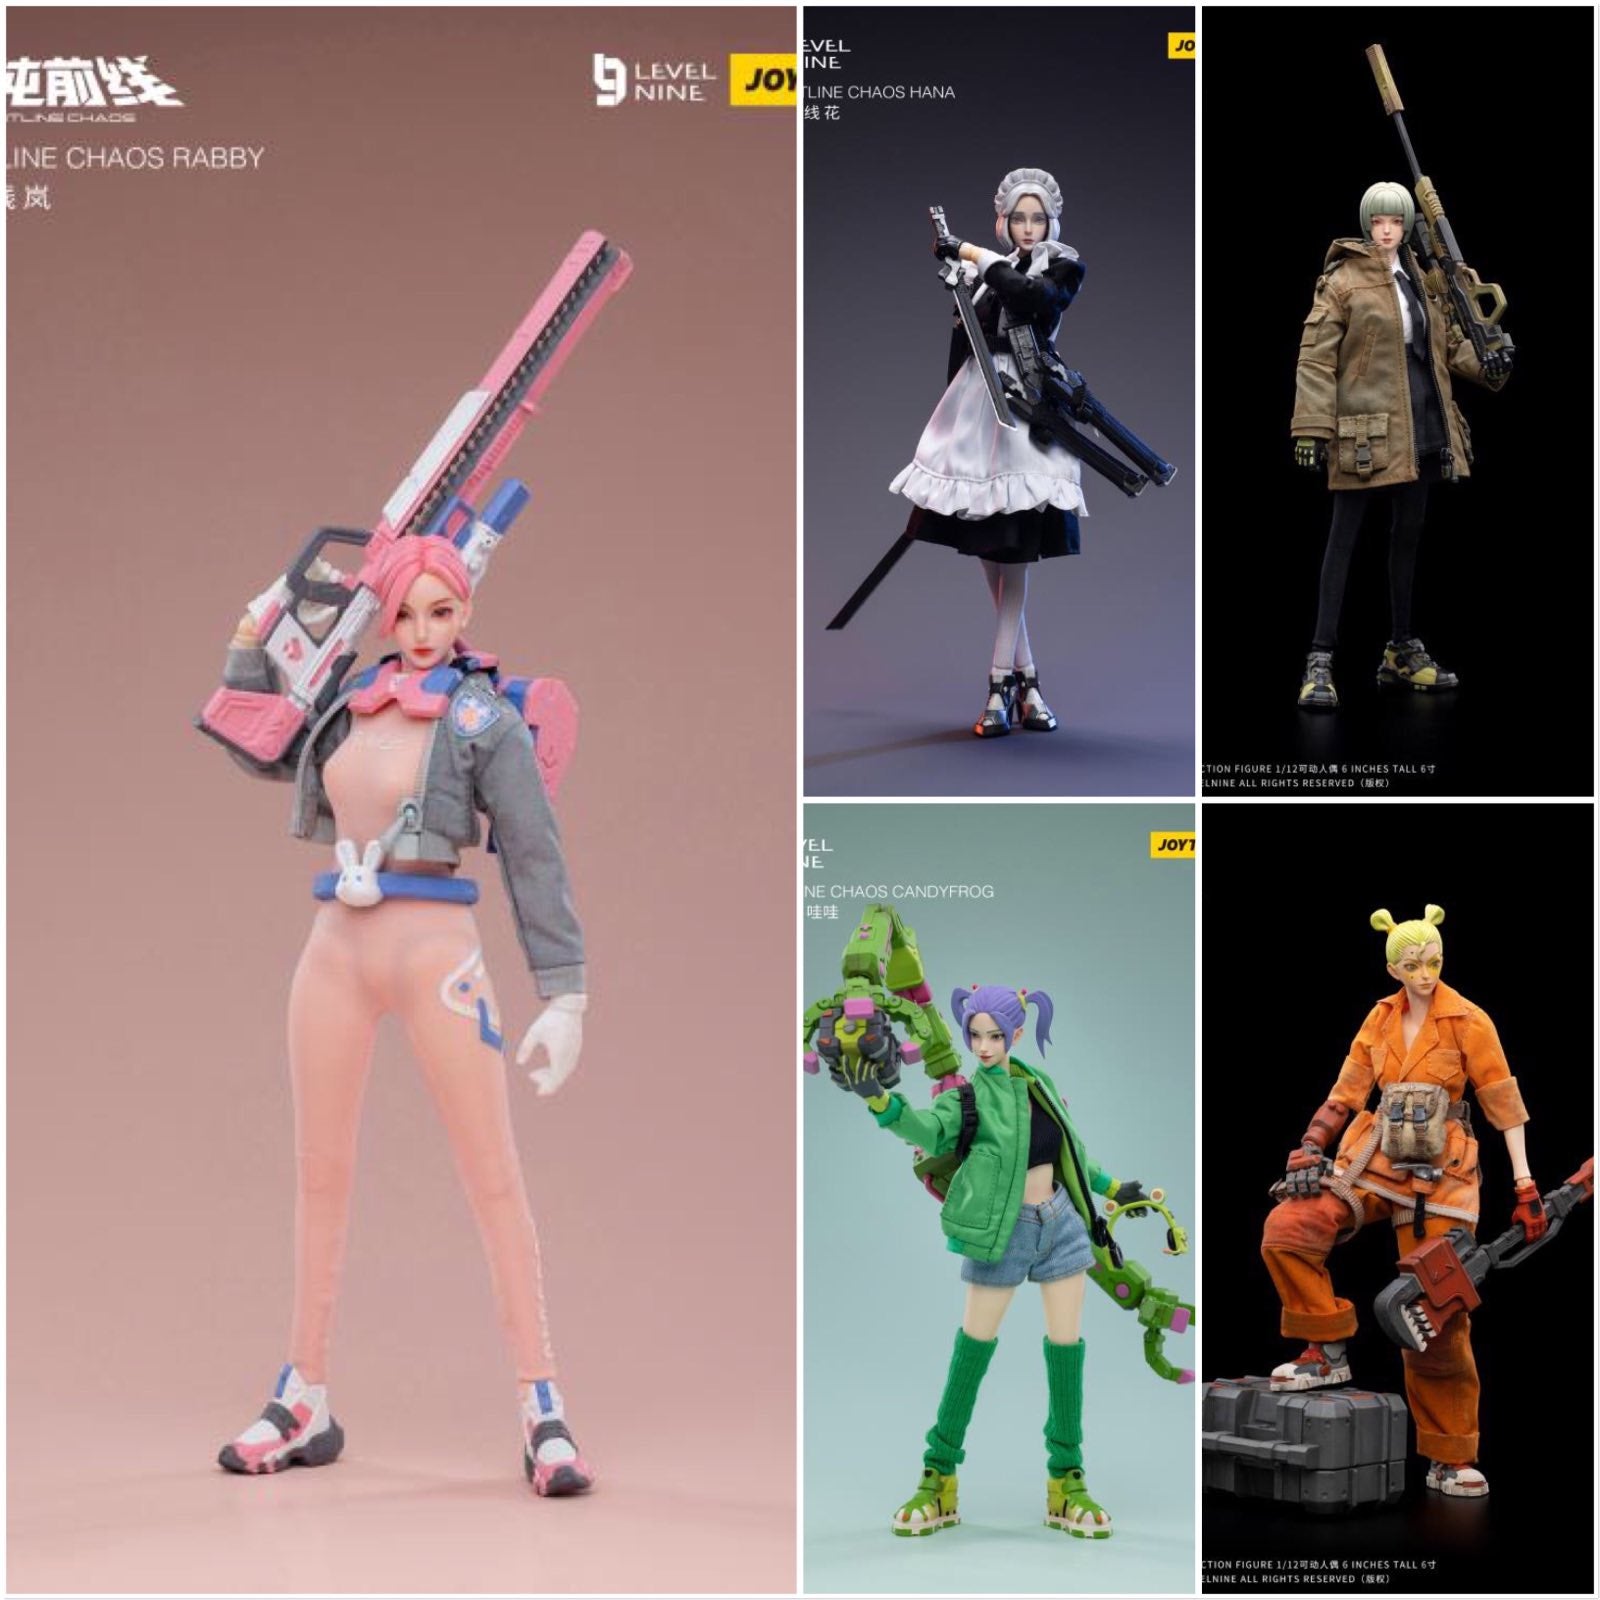 Joy Toy Frontline Chaos figure series continues in 1/12 Scale. Dressed in real cloth and stylish clothing, JoyToy Frontline Chaos is ready to run into battle with weapon combos. 